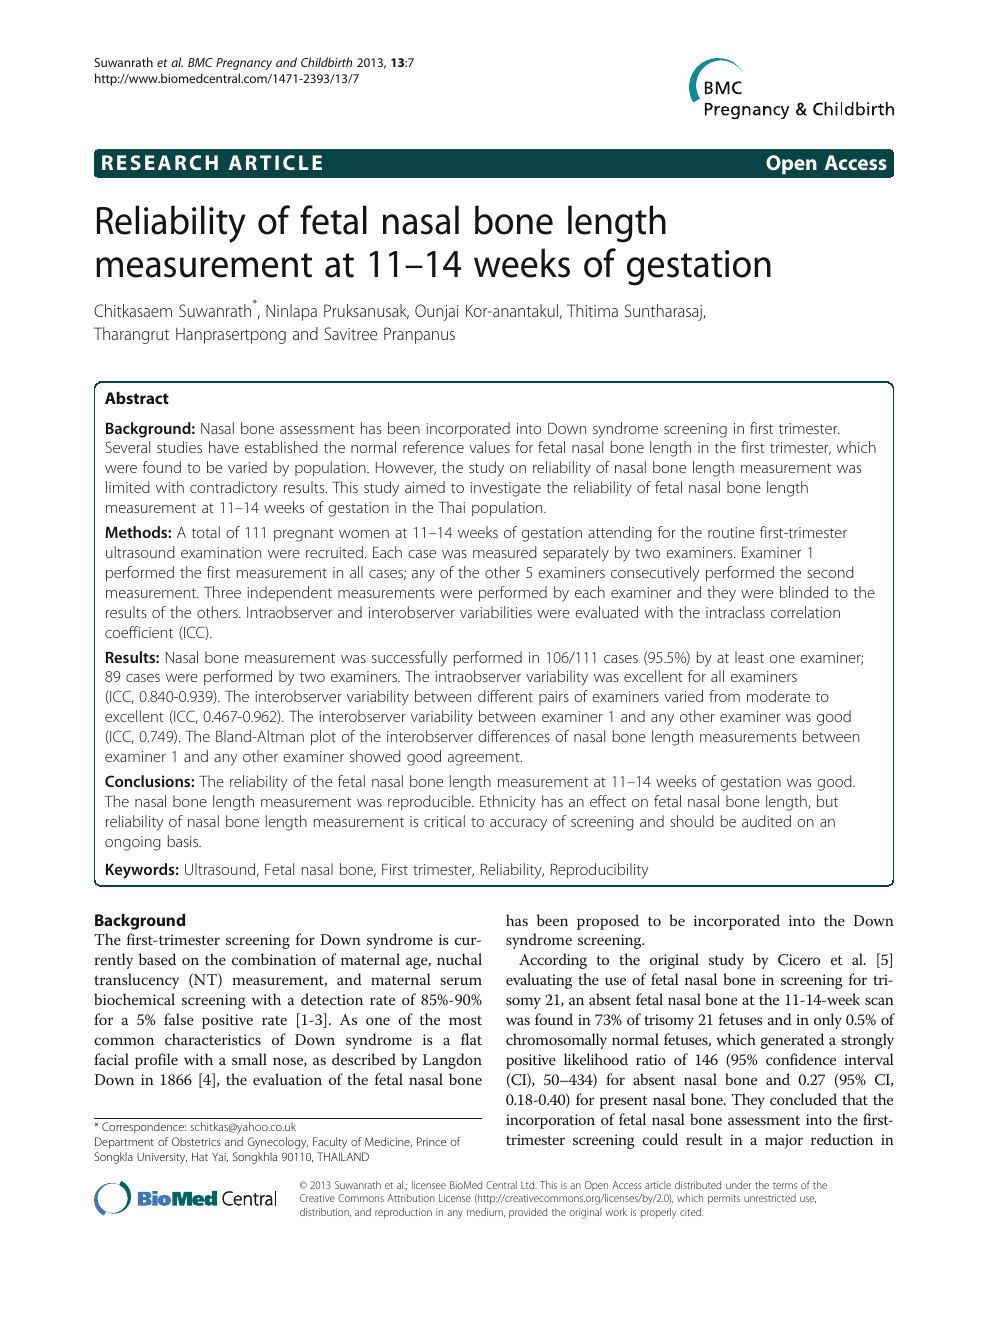 Reliability Of Fetal Nasal Bone Length Measurement At 11 14 Weeks Of Gestation Topic Of Research Paper In Medical Engineering Download Scholarly Article Pdf And Read For Free On Cyberleninka Open Science Hub